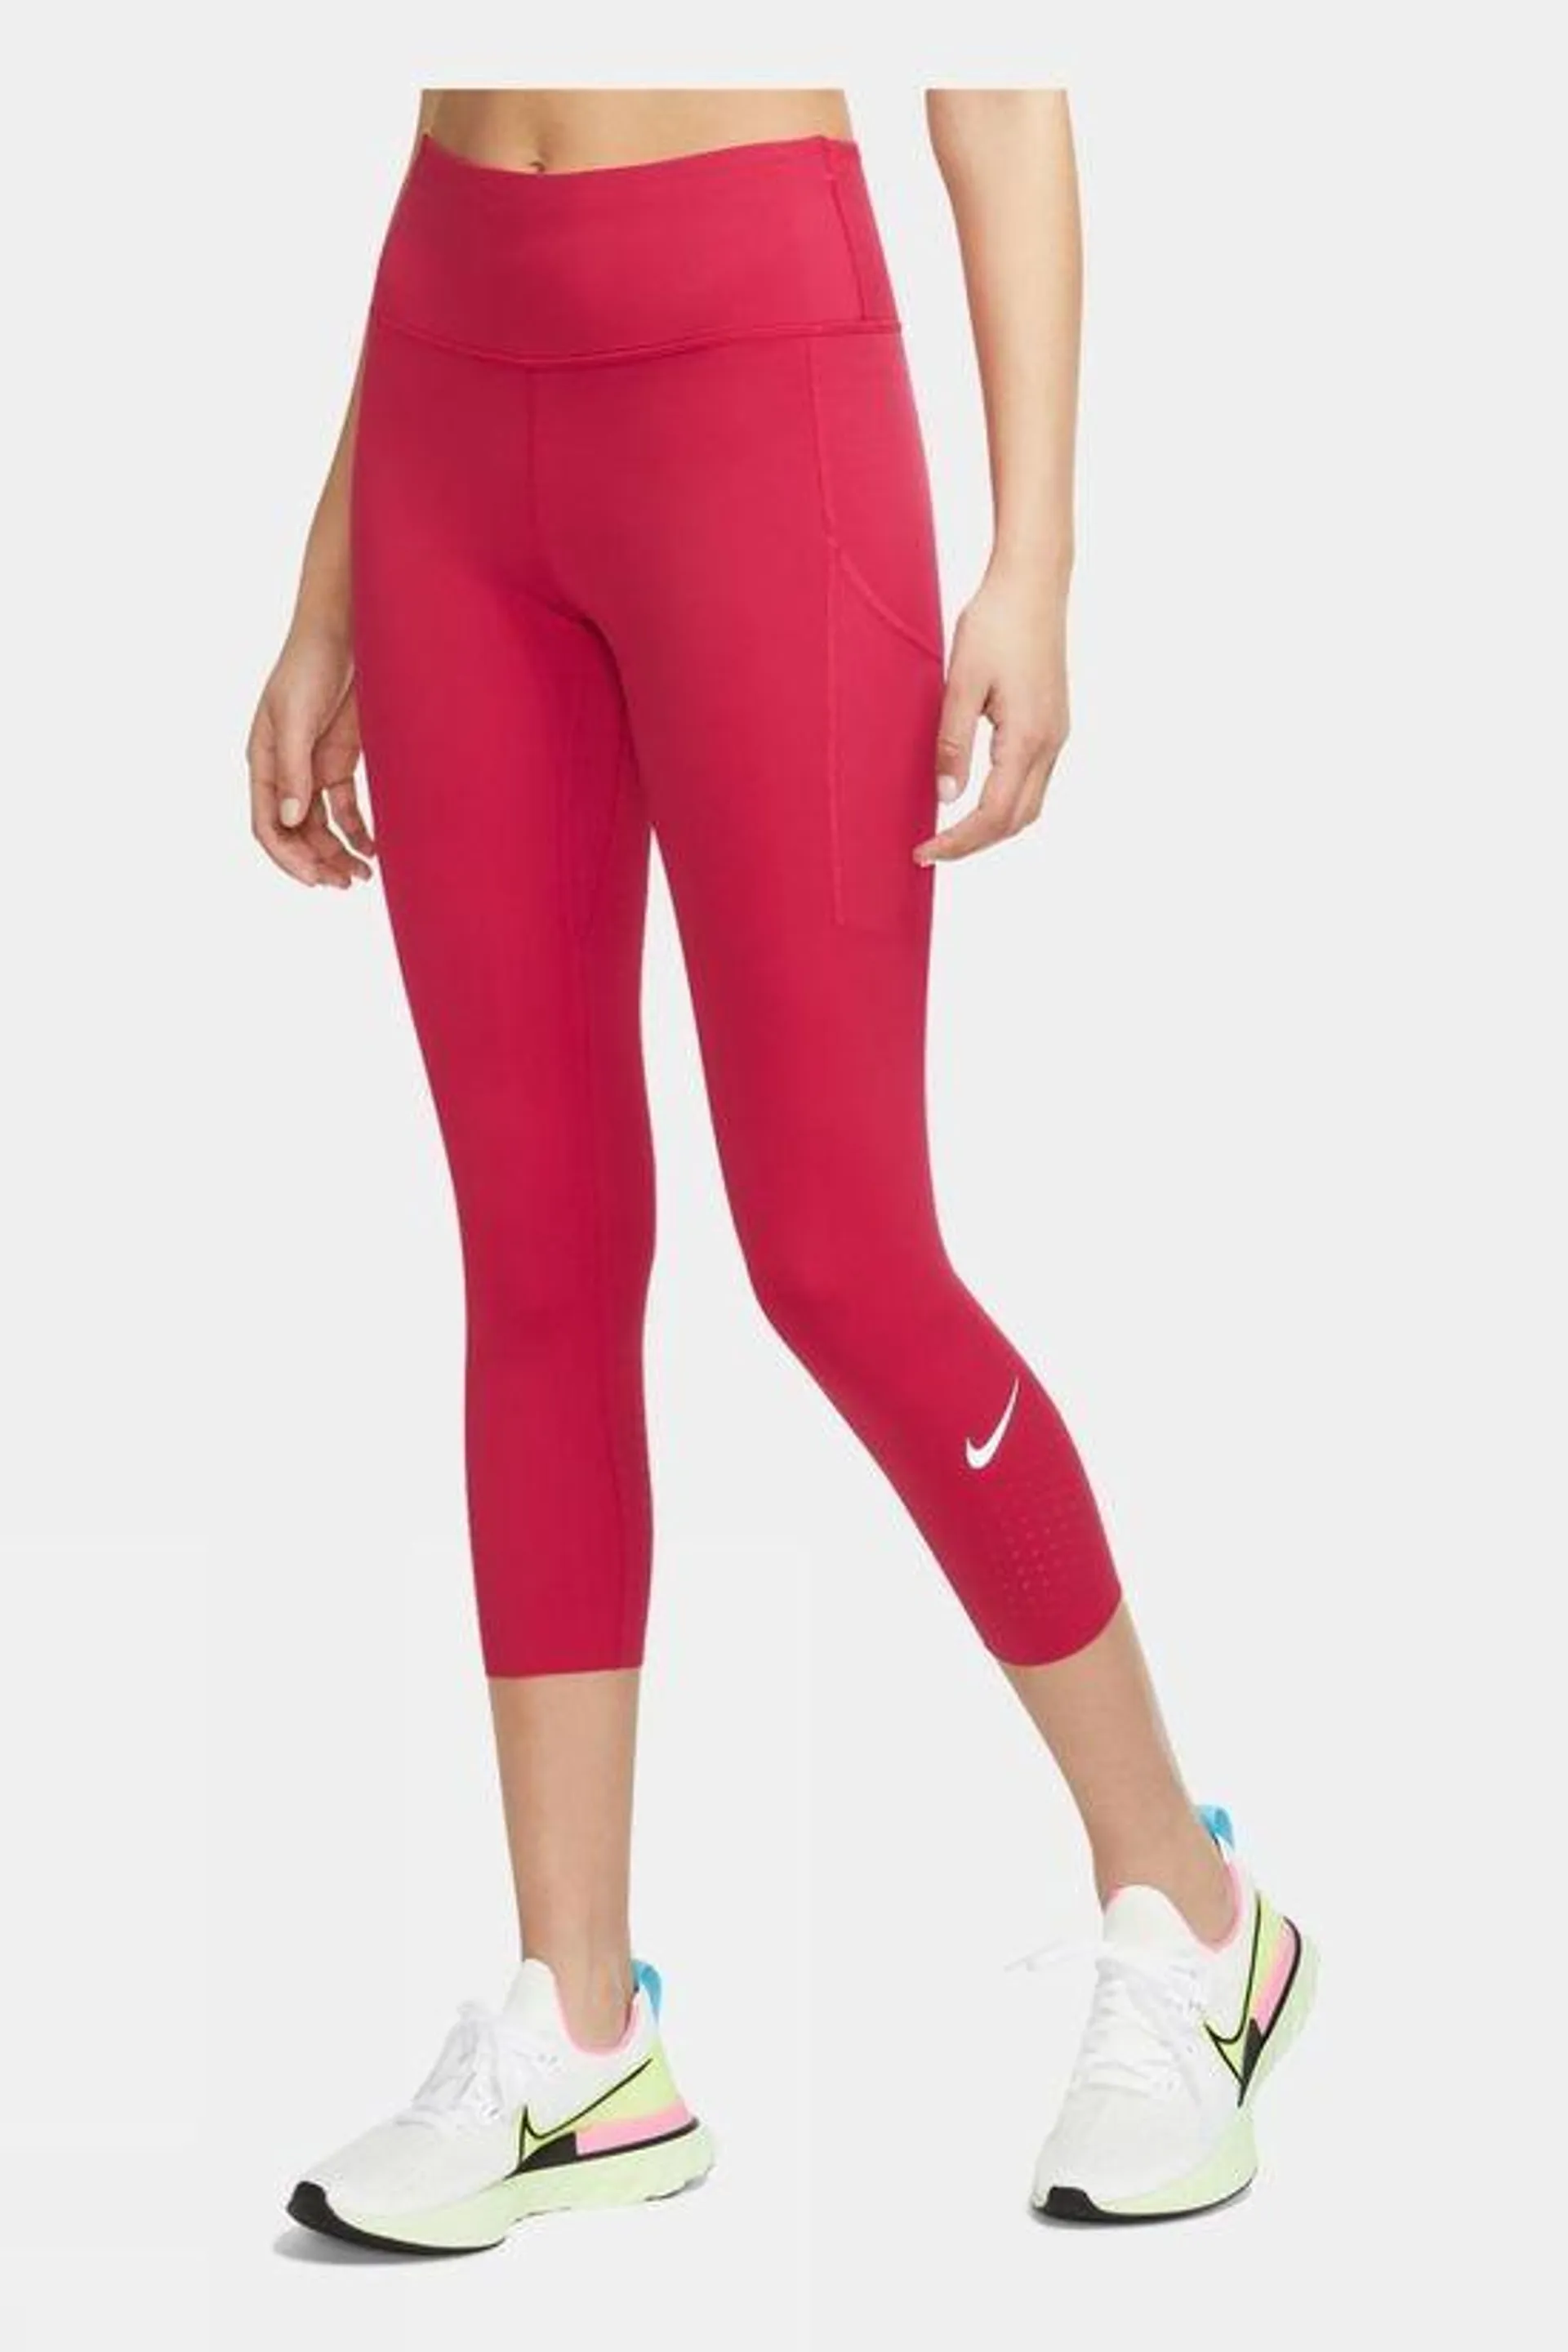 Nike Womens Epic Luxe 3/4 Tights